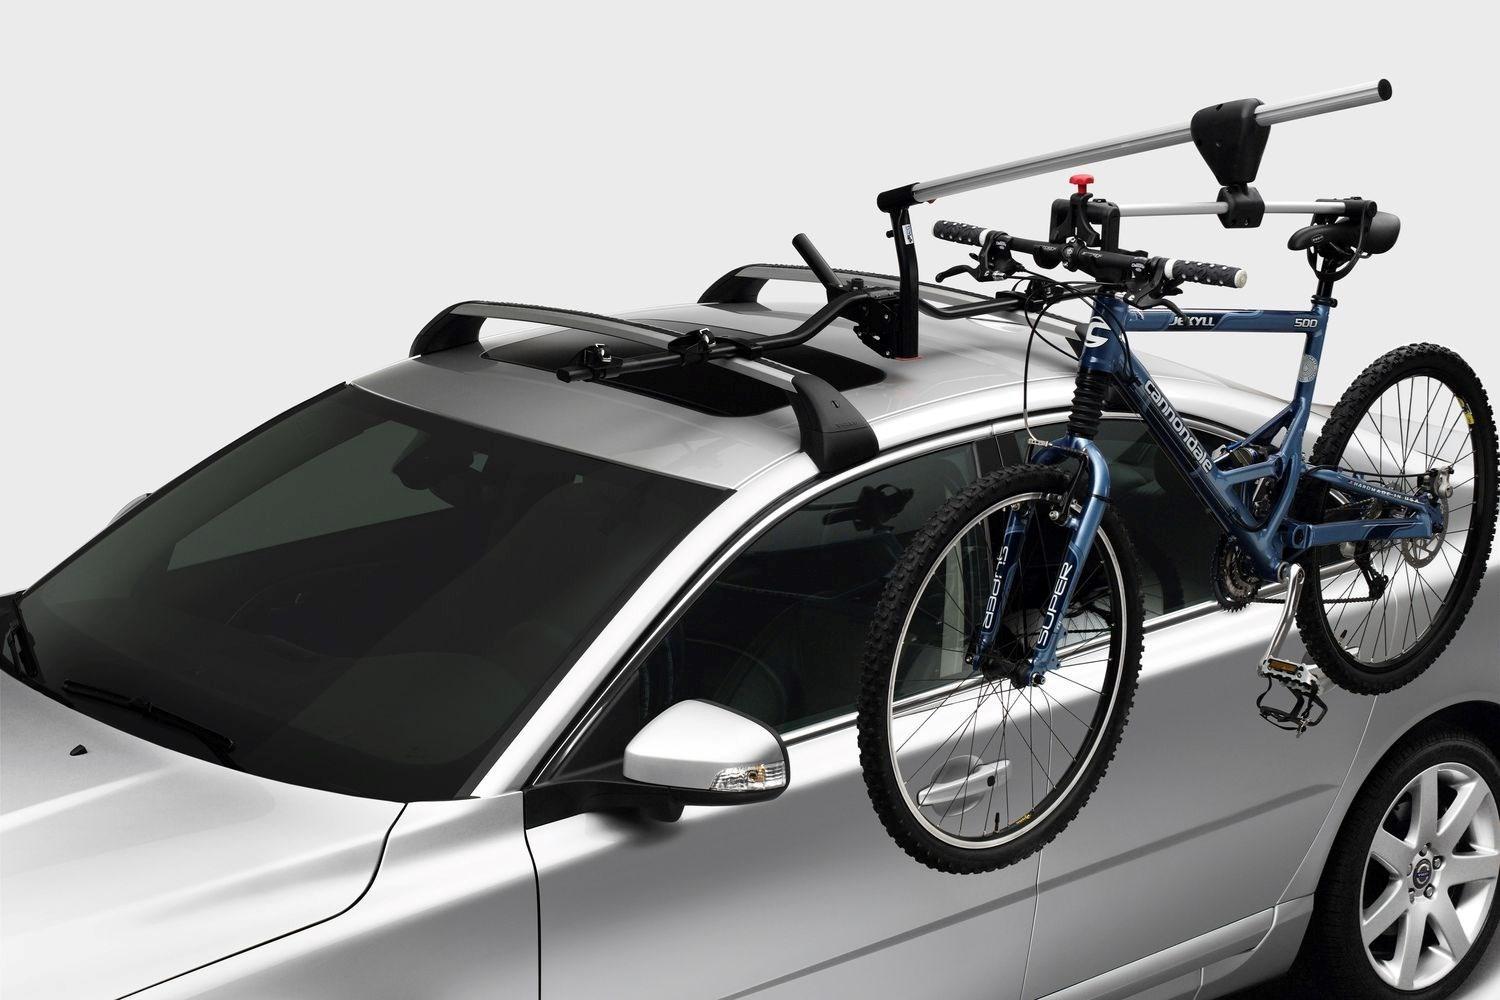 The latest Volvo XC60 with a roof rack installed holds an blue adult bicycle